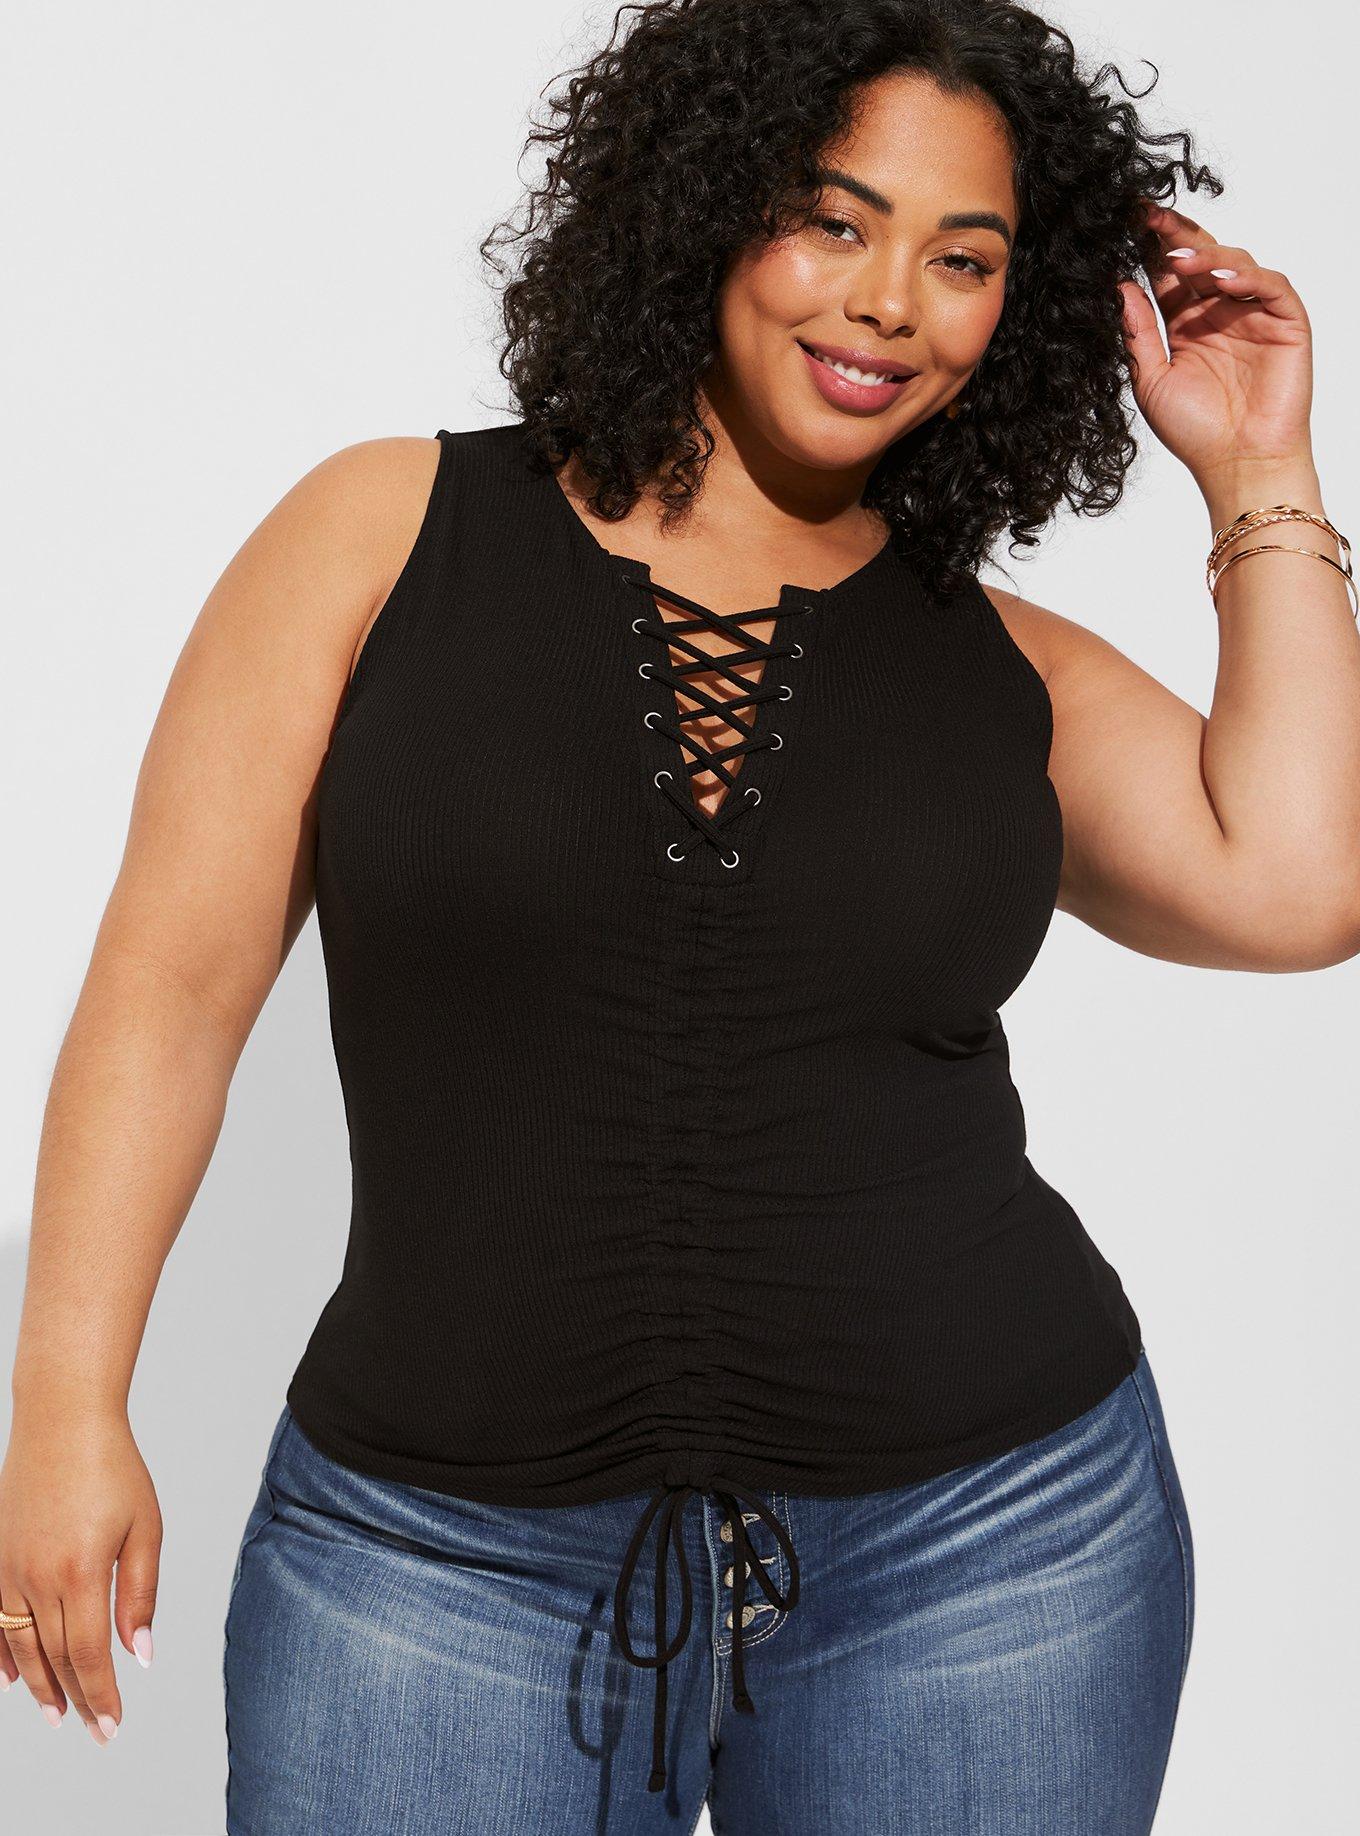 Cut Out Crop Top Plus Size Tops for Womens 1X 2X 3X 4X 5X Plus Size Going  Out One Shoulder Sleeveless Summer Top Women Gifts -  Canada